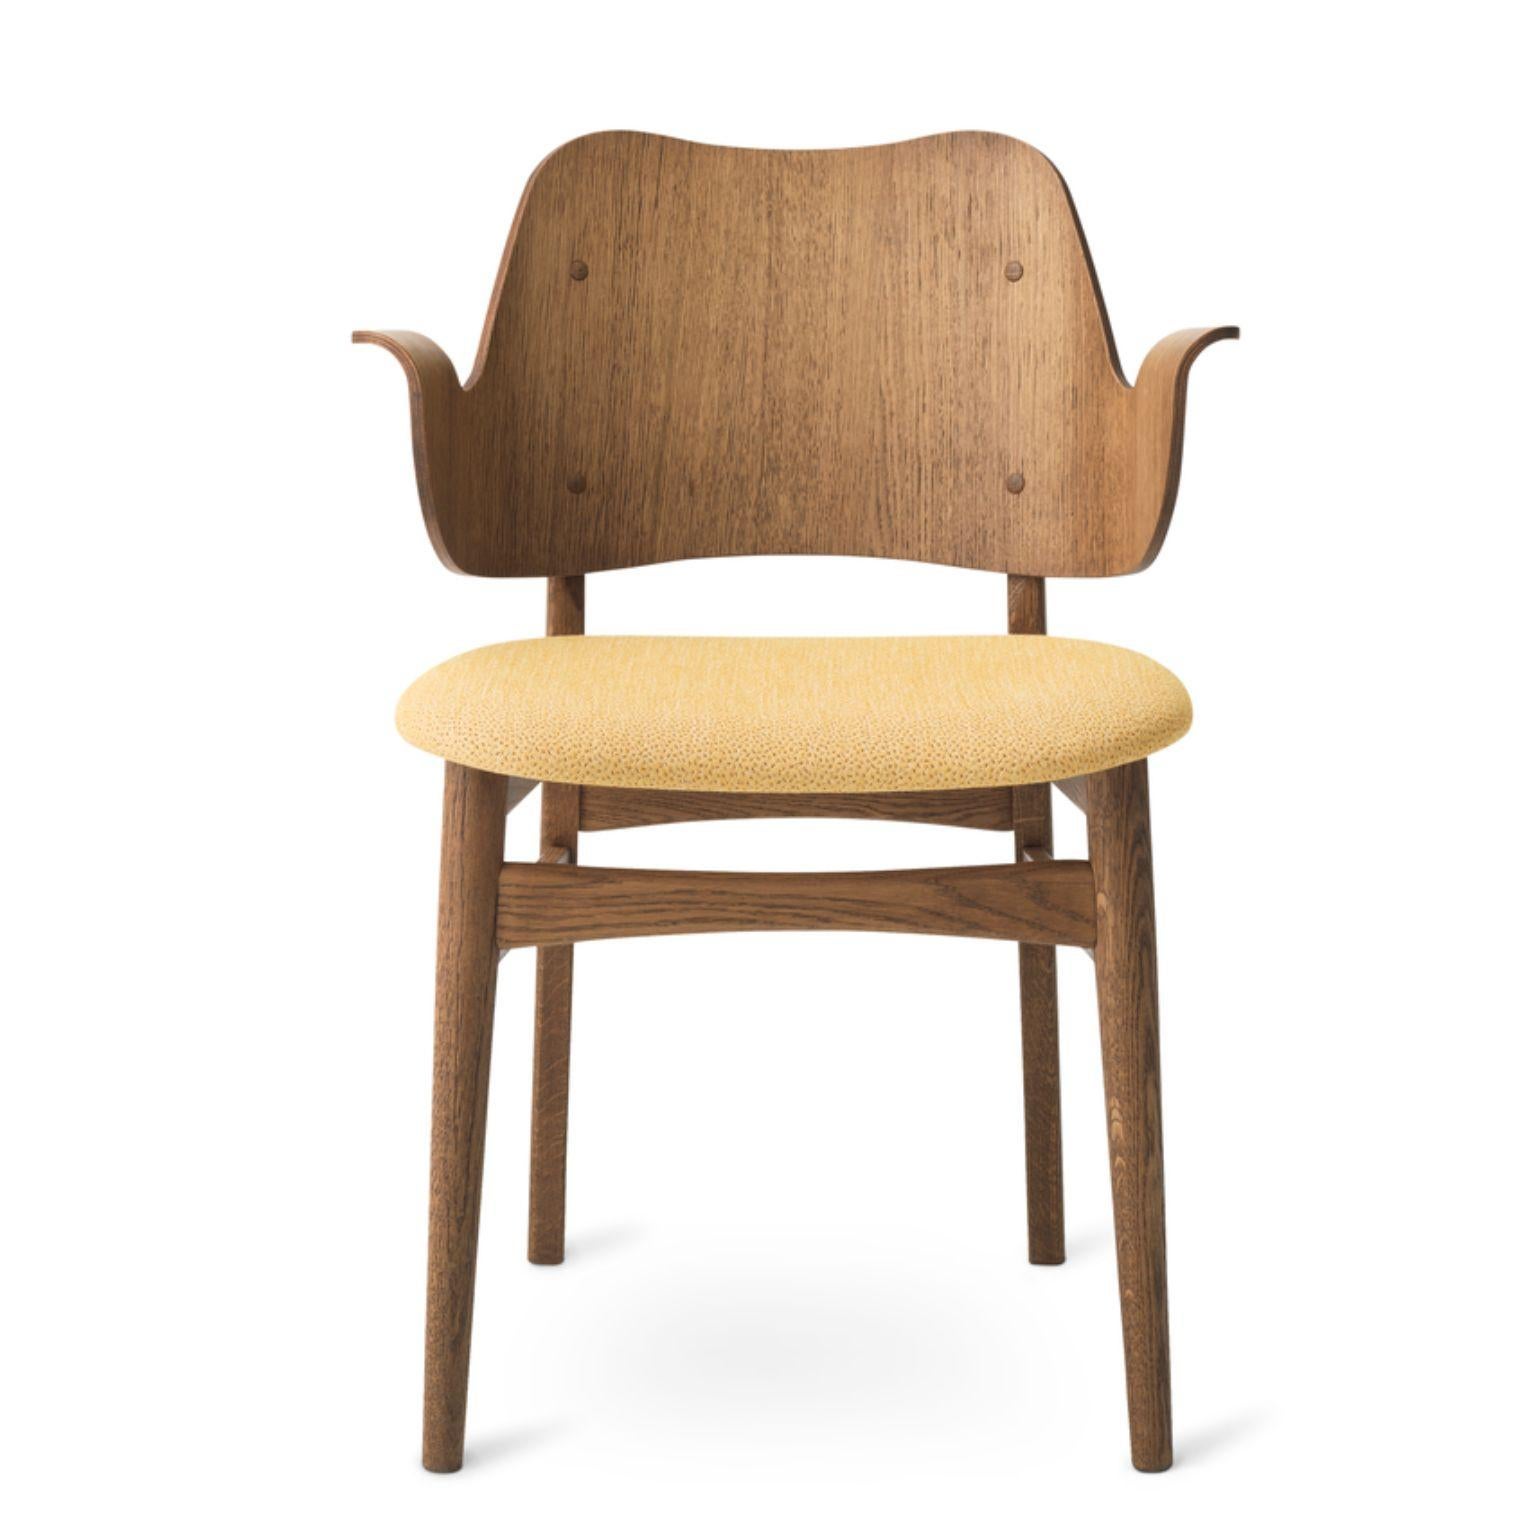 Gesture chair teak oiled oak desert yellow by Warm Nordic
Dimensions: D 56 x W 53 x H 80 cm
Material: Teak or white oiled solid oak, Black lacquered solid beech, Veneer seat and back, textile upholstery
Weight: 7.5 kg
Also available in different